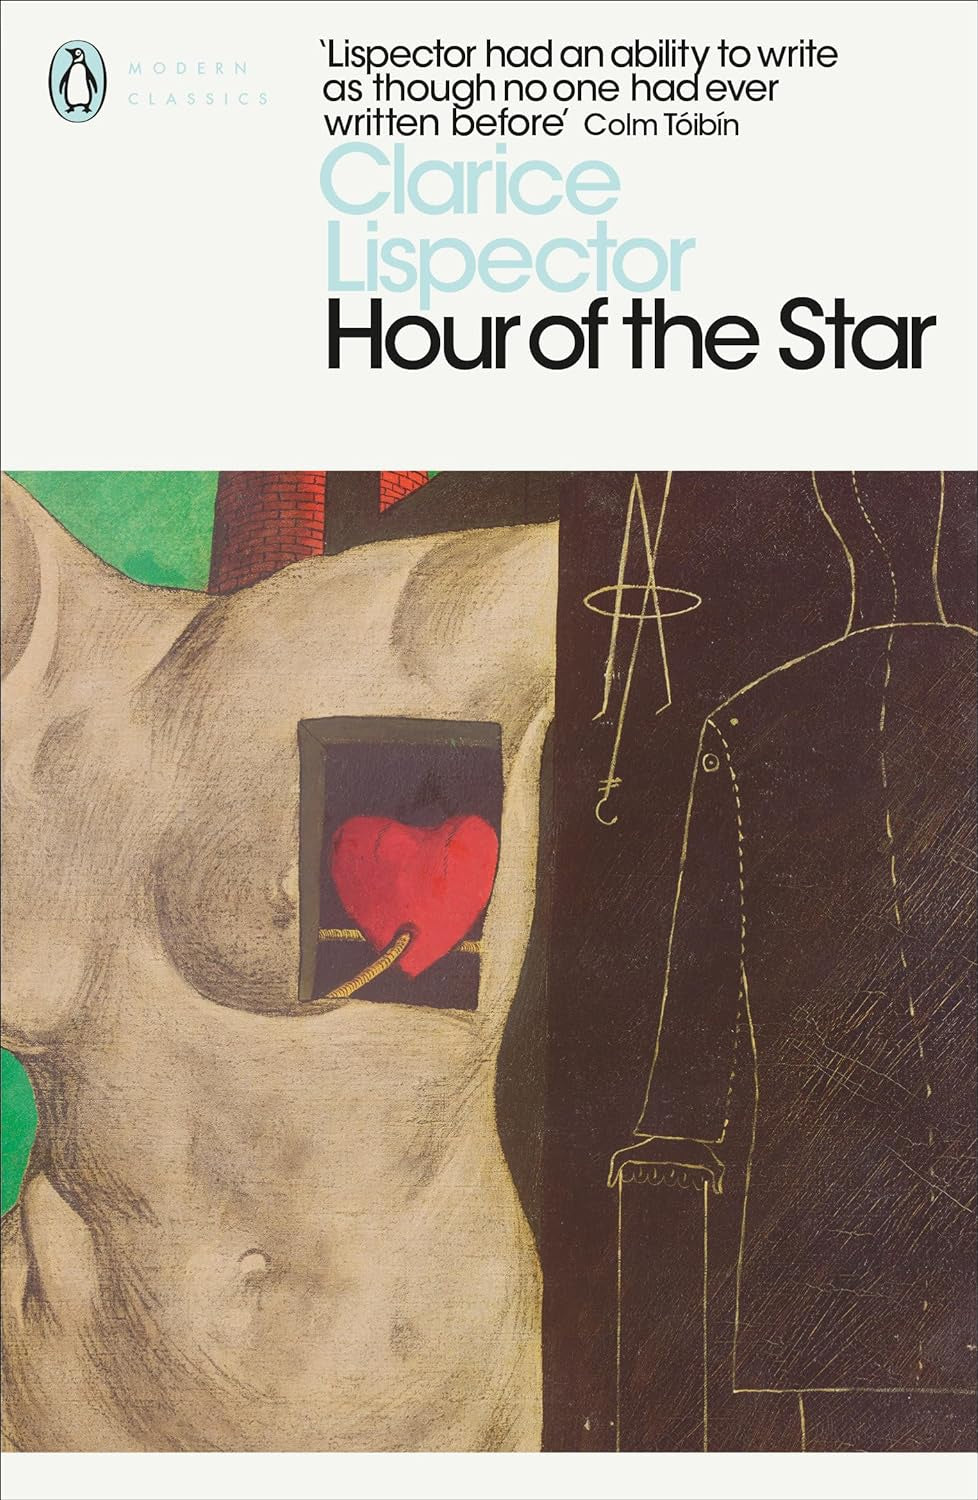 Hour of the Star by Clarice Lispector